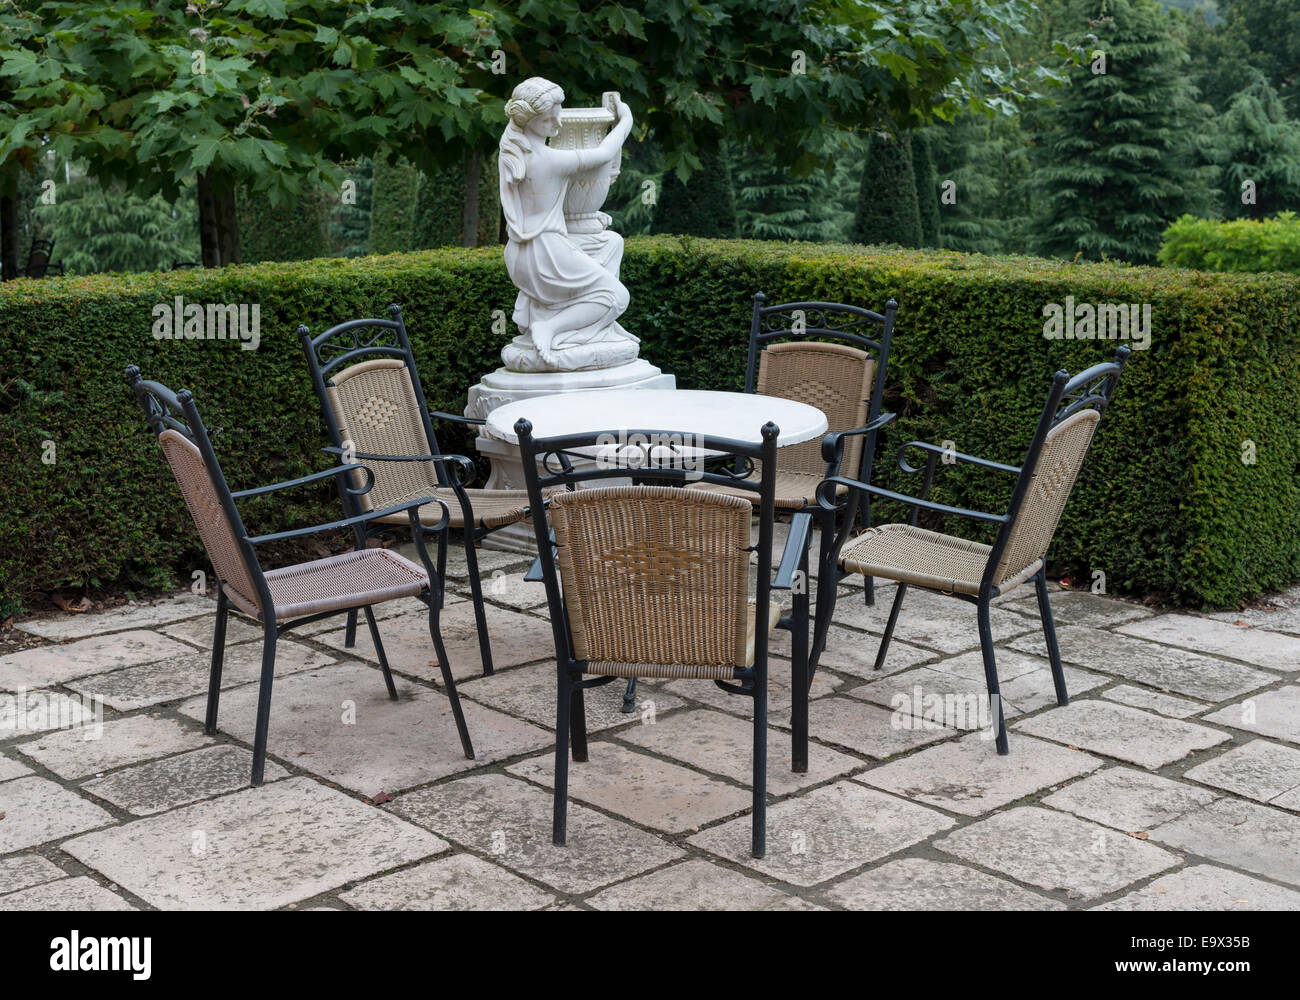 italian garden with chairs and table with white statue on background Stock Photo